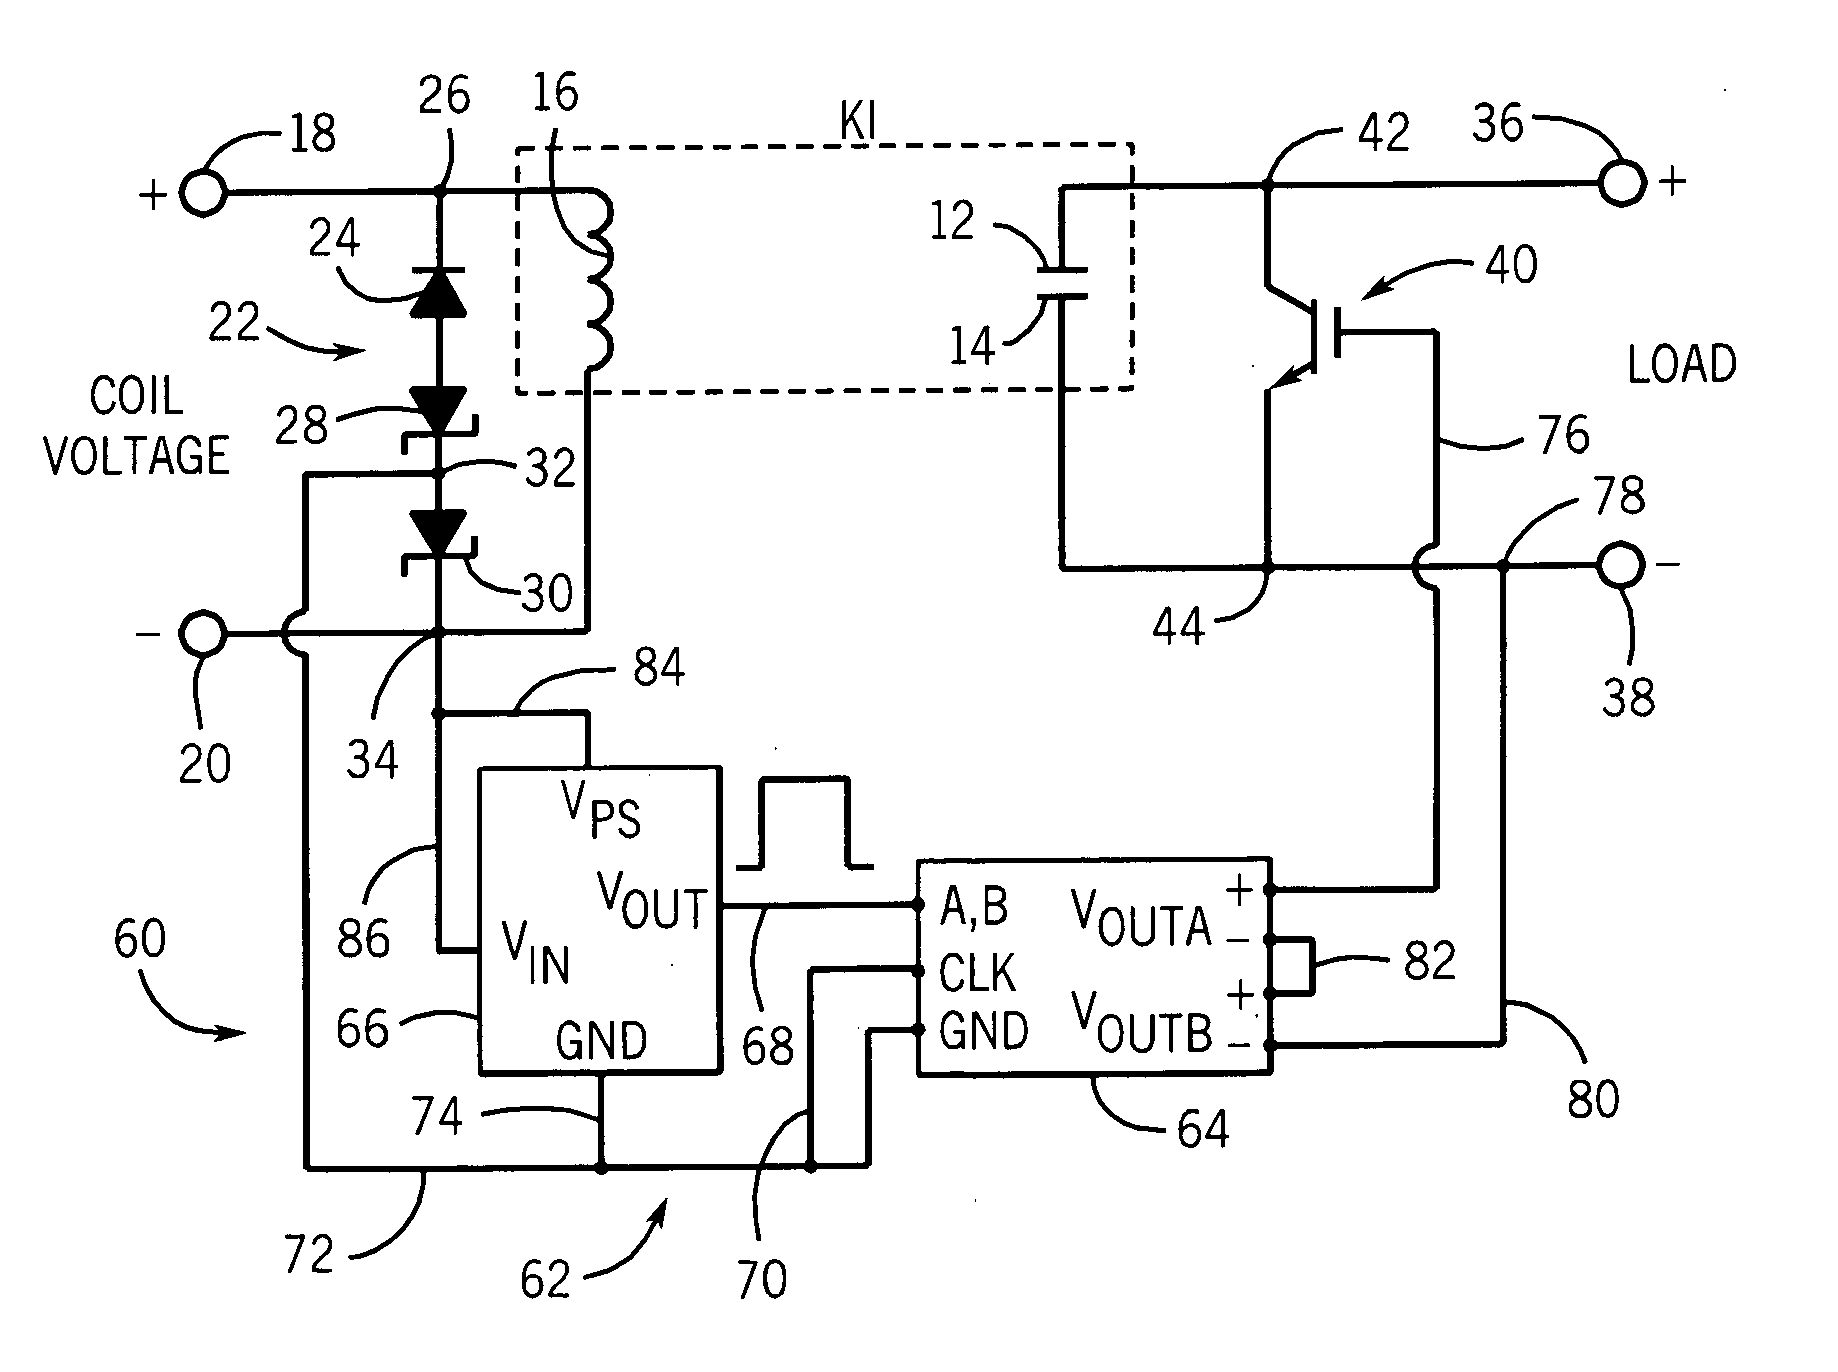 Bypass circuit to prevent arcing in a switching device